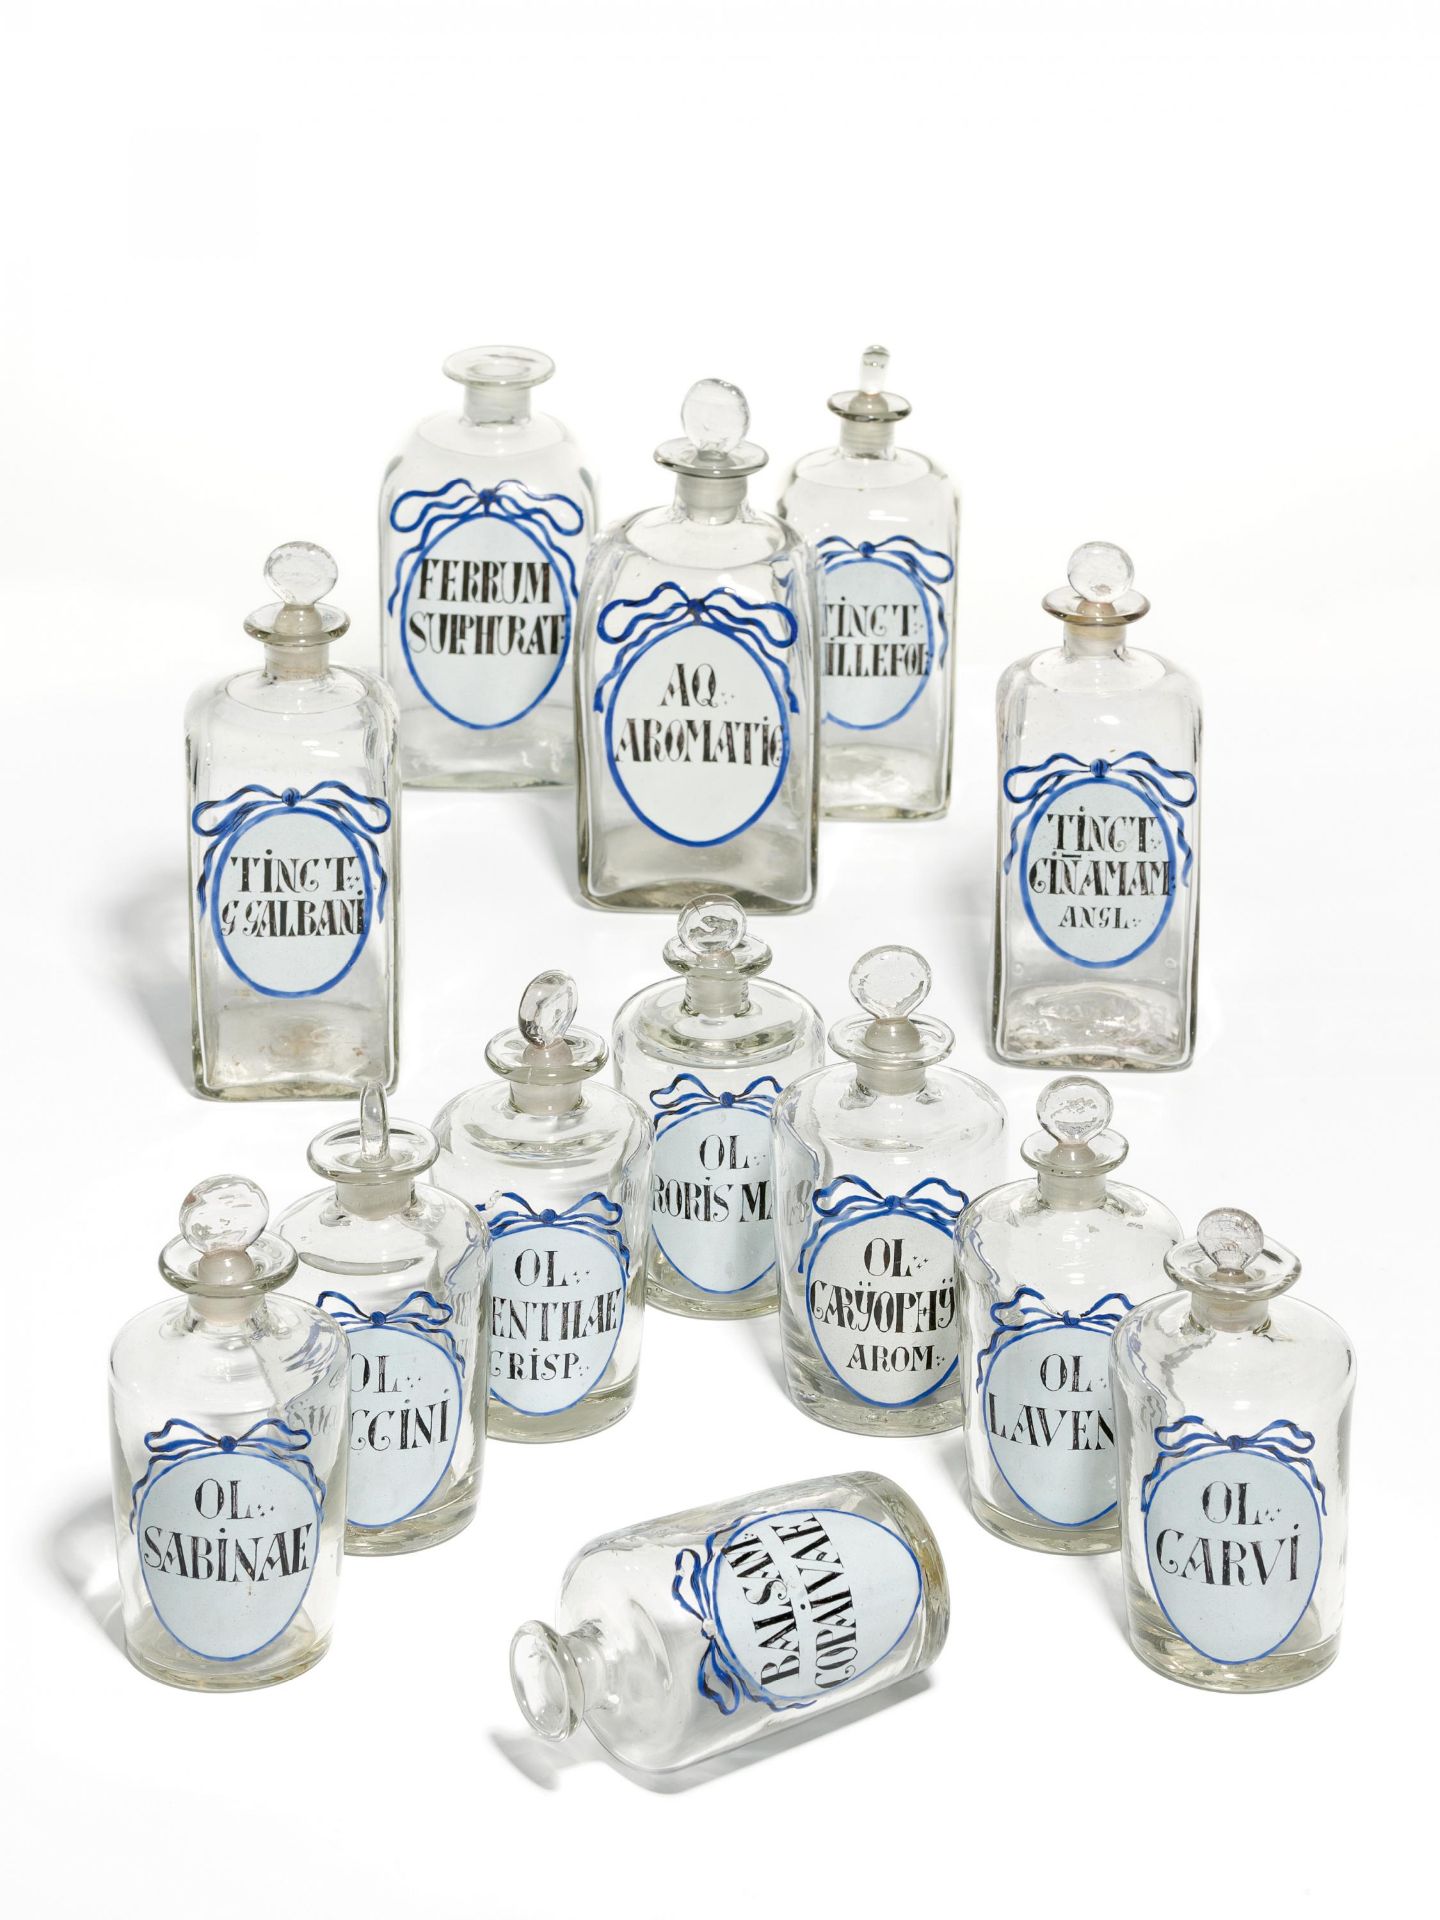 25 GLASS PHARMACY BOTTLES WITH BLUE RIBBONS. Germany. Ende 18.Jh. Farbloses, tlw. leicht grau-